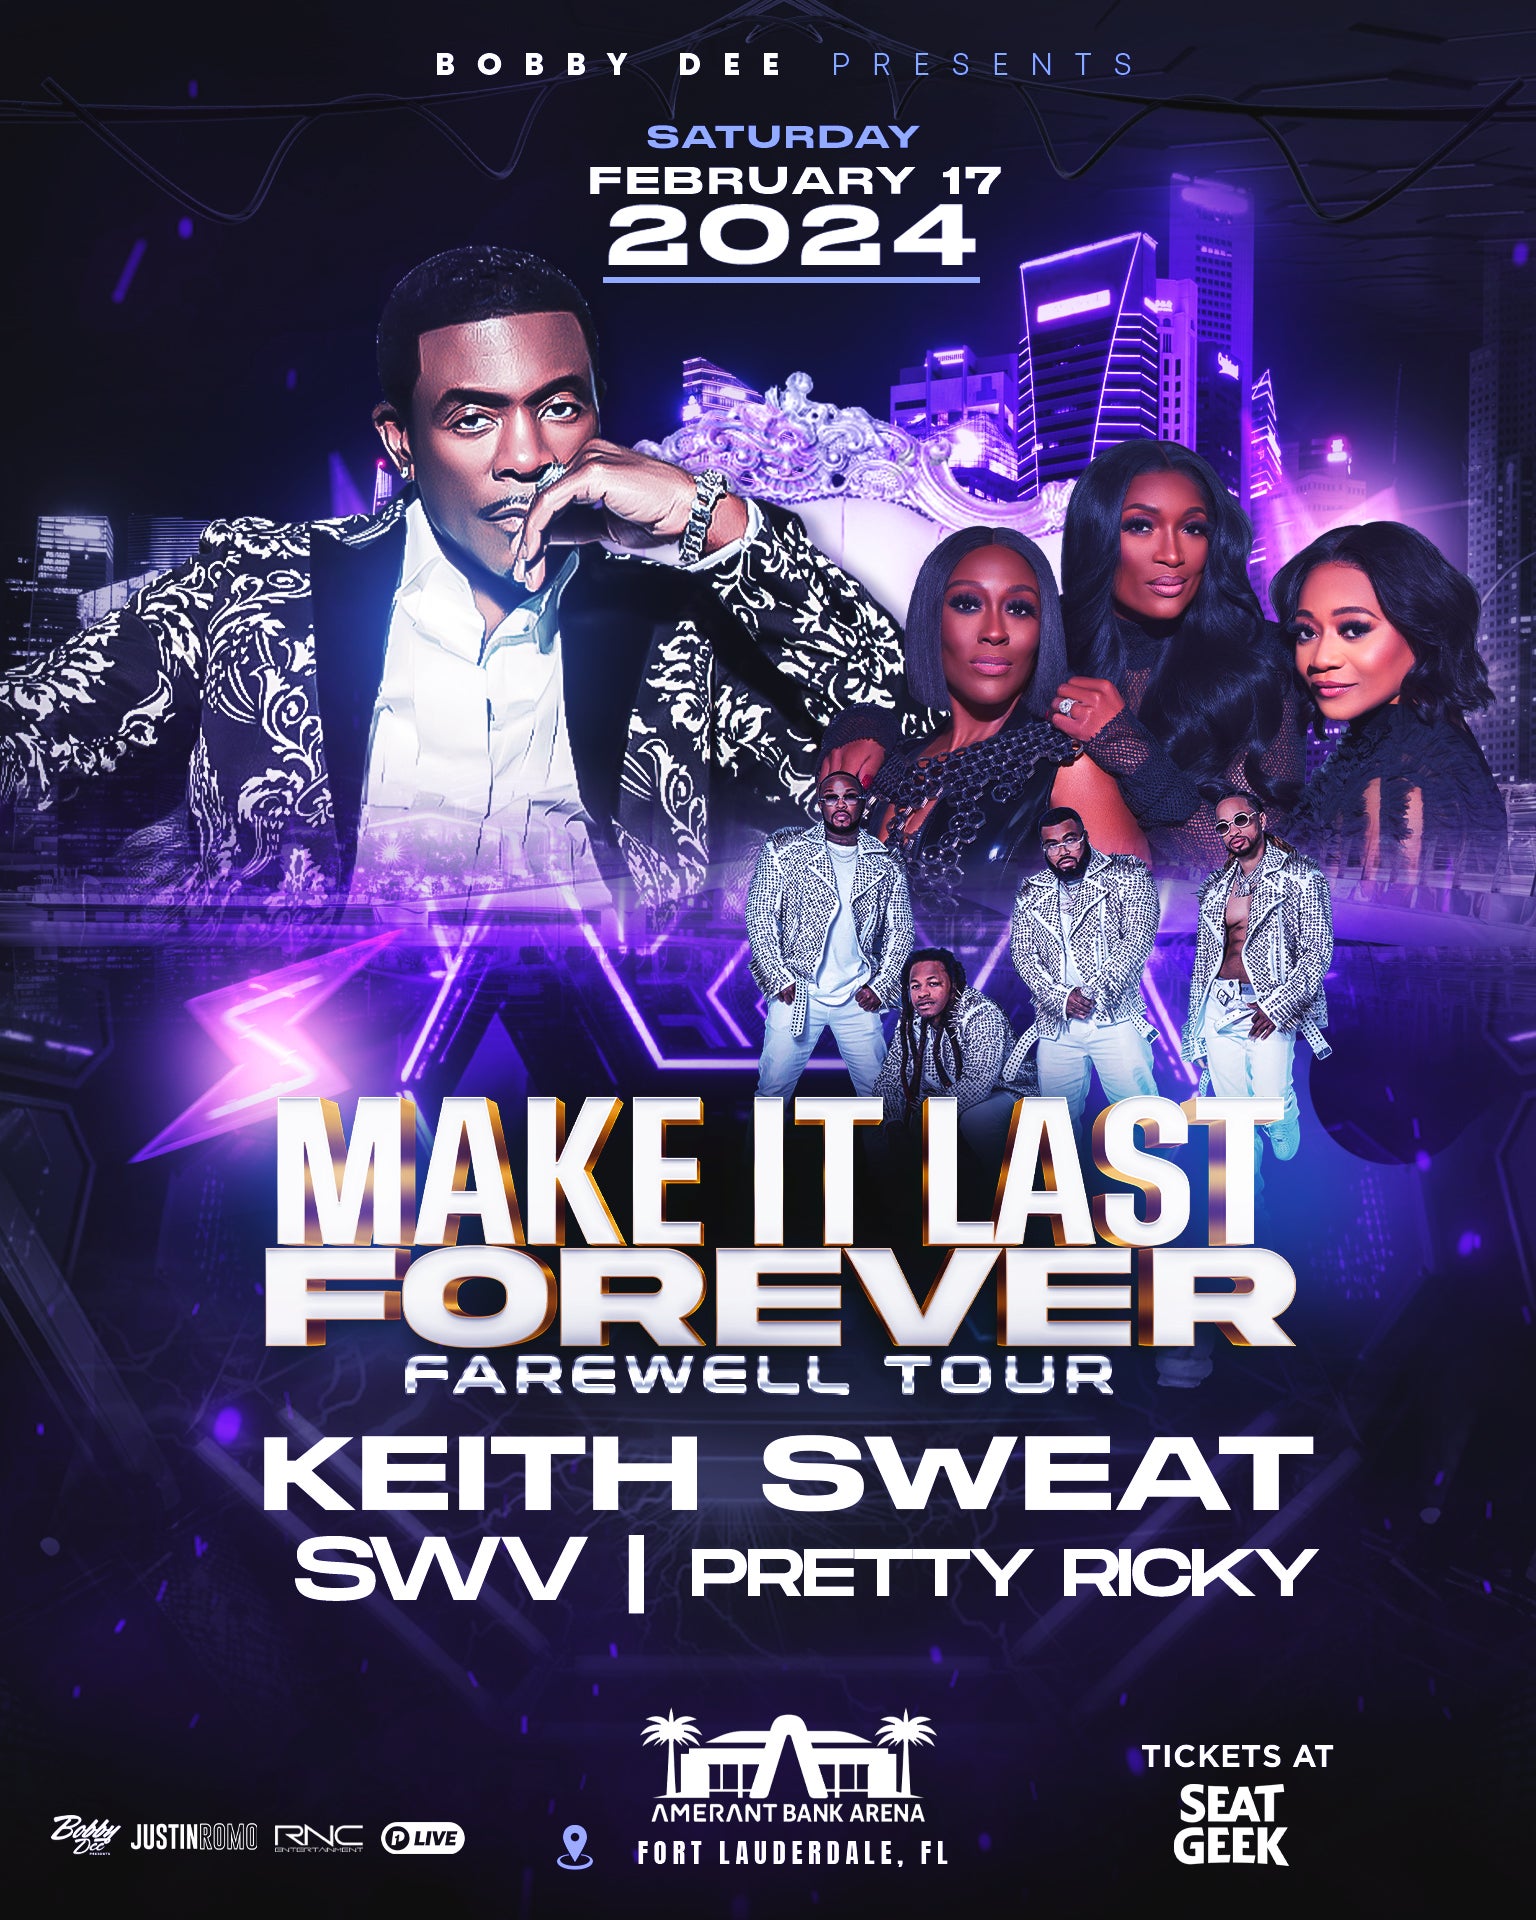 More Info for "Make it Last Forever 35th Anniversary" Tour Featuring Keith Sweat, SWV, Pretty Ricky Coming to Amerant Bank Arena on Saturday, Feb. 17, 2024